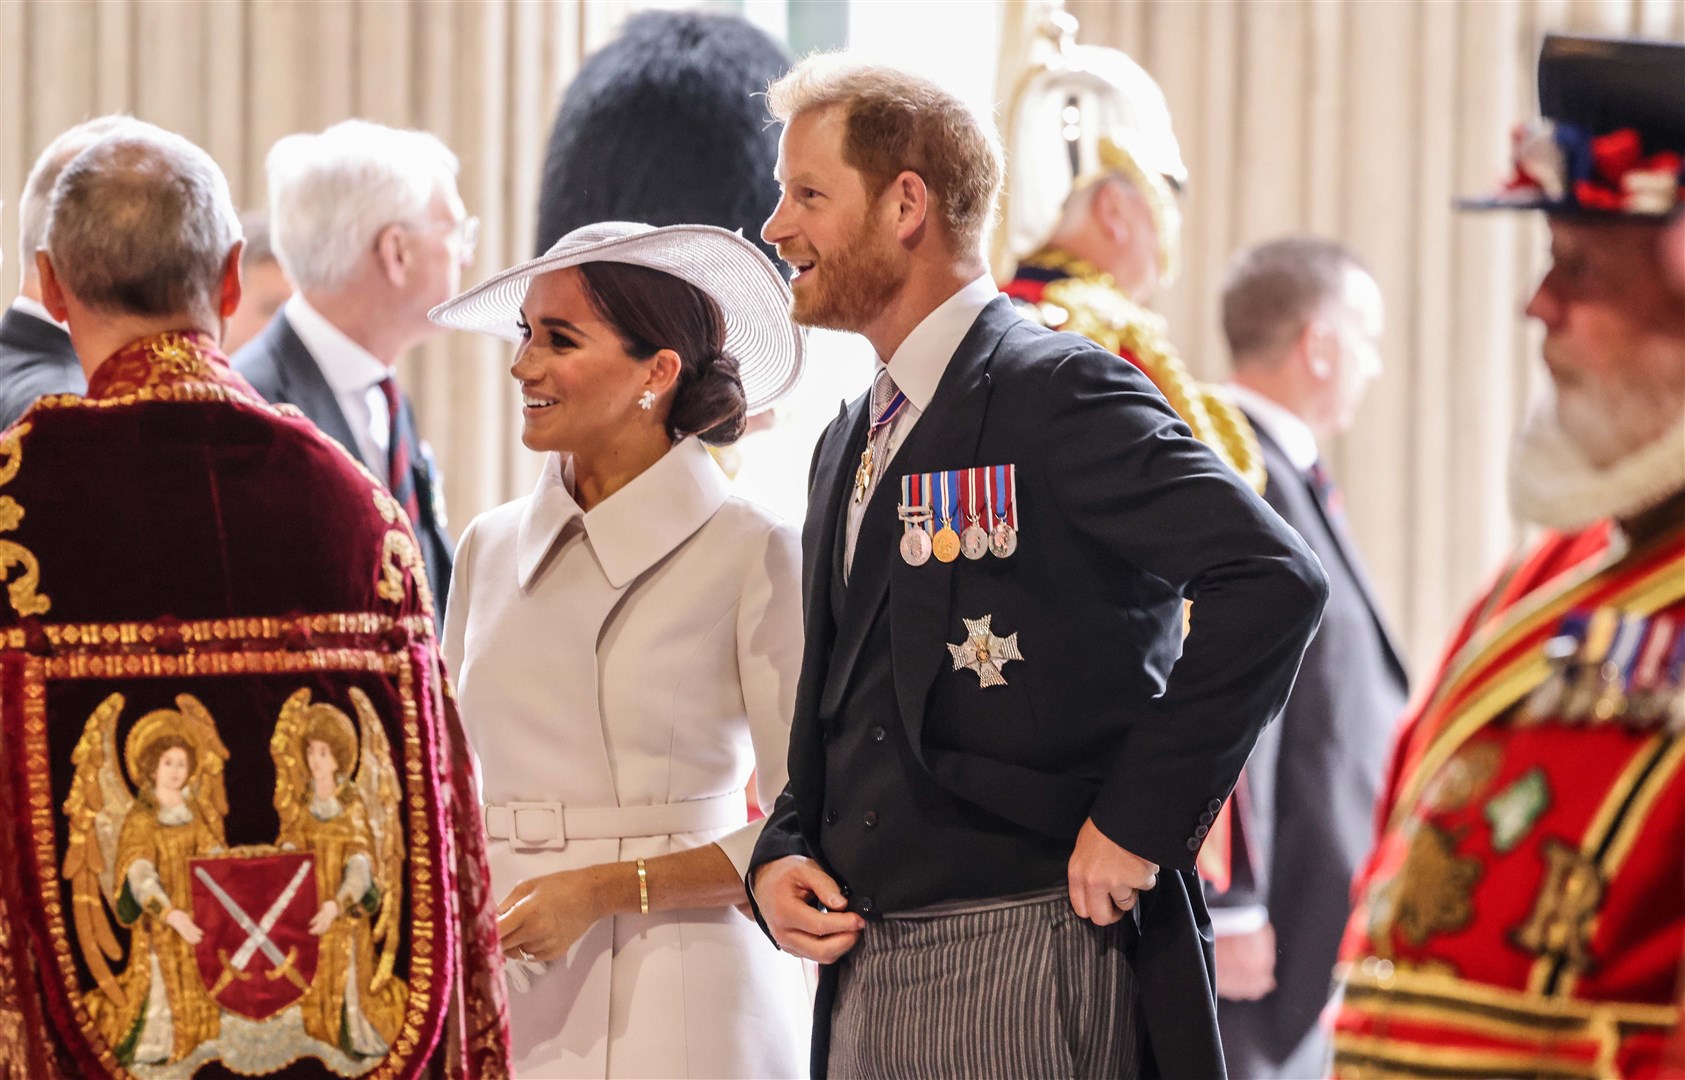 The Duke and Duchess of Sussex travelled from America for the service (Richard Pohle/The Times/PA)